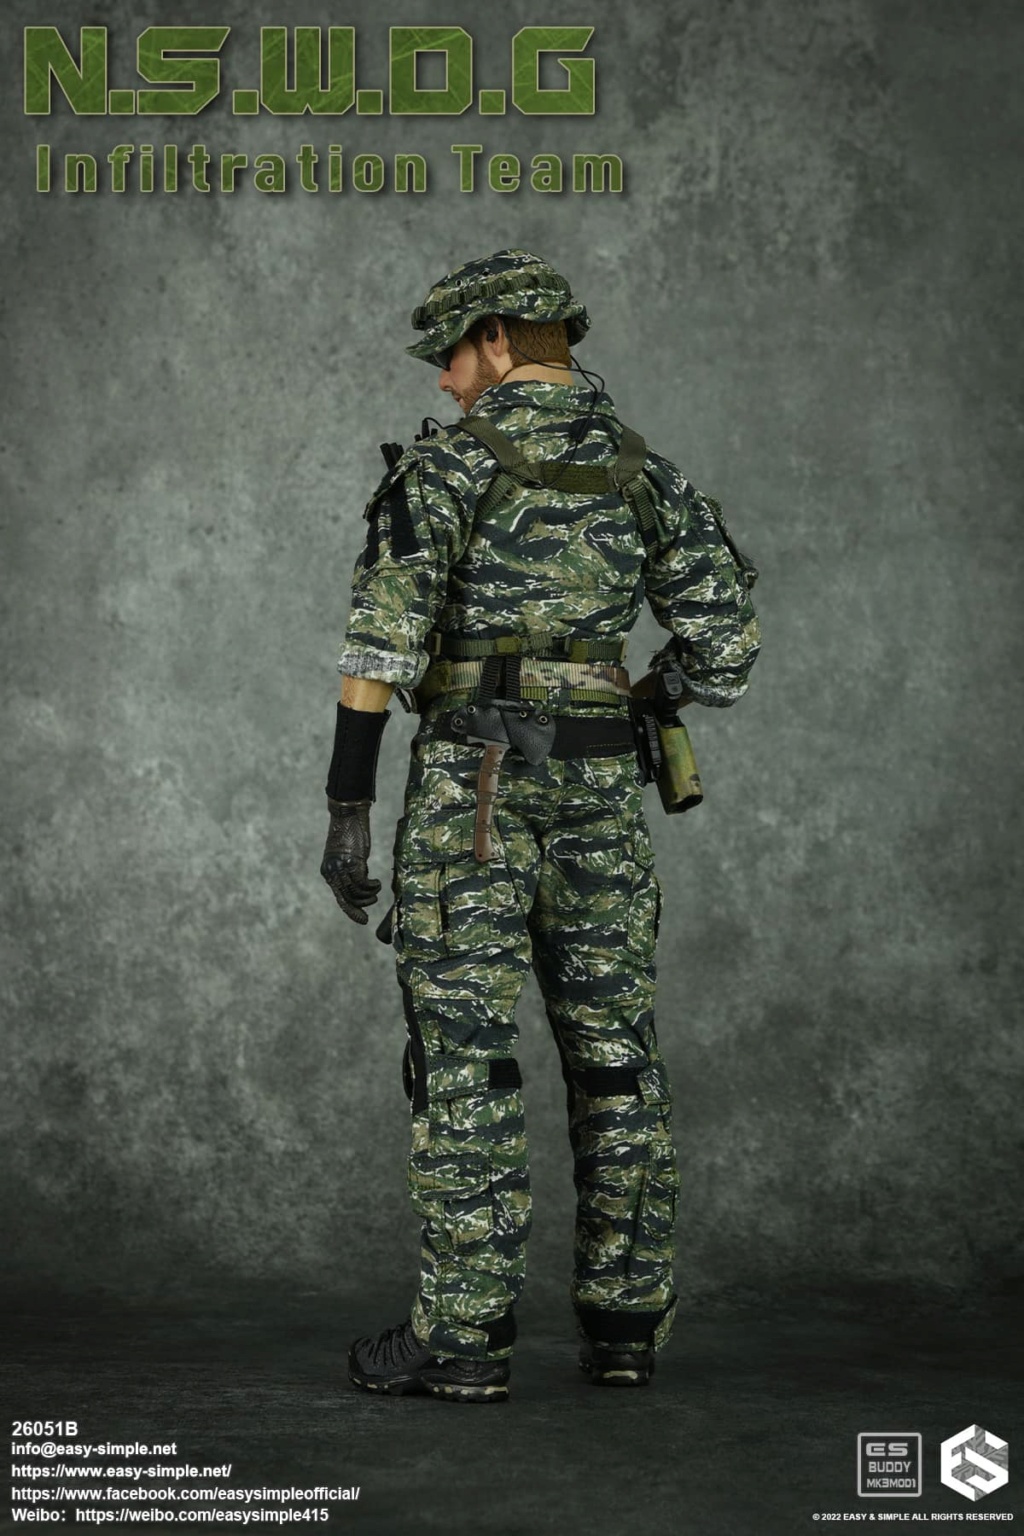 NEW PRODUCT: EASY AND SIMPLE 1/6 SCALE FIGURE: N.S.W.D.G INFILTRATION TEAM - (2 Versions) 7603